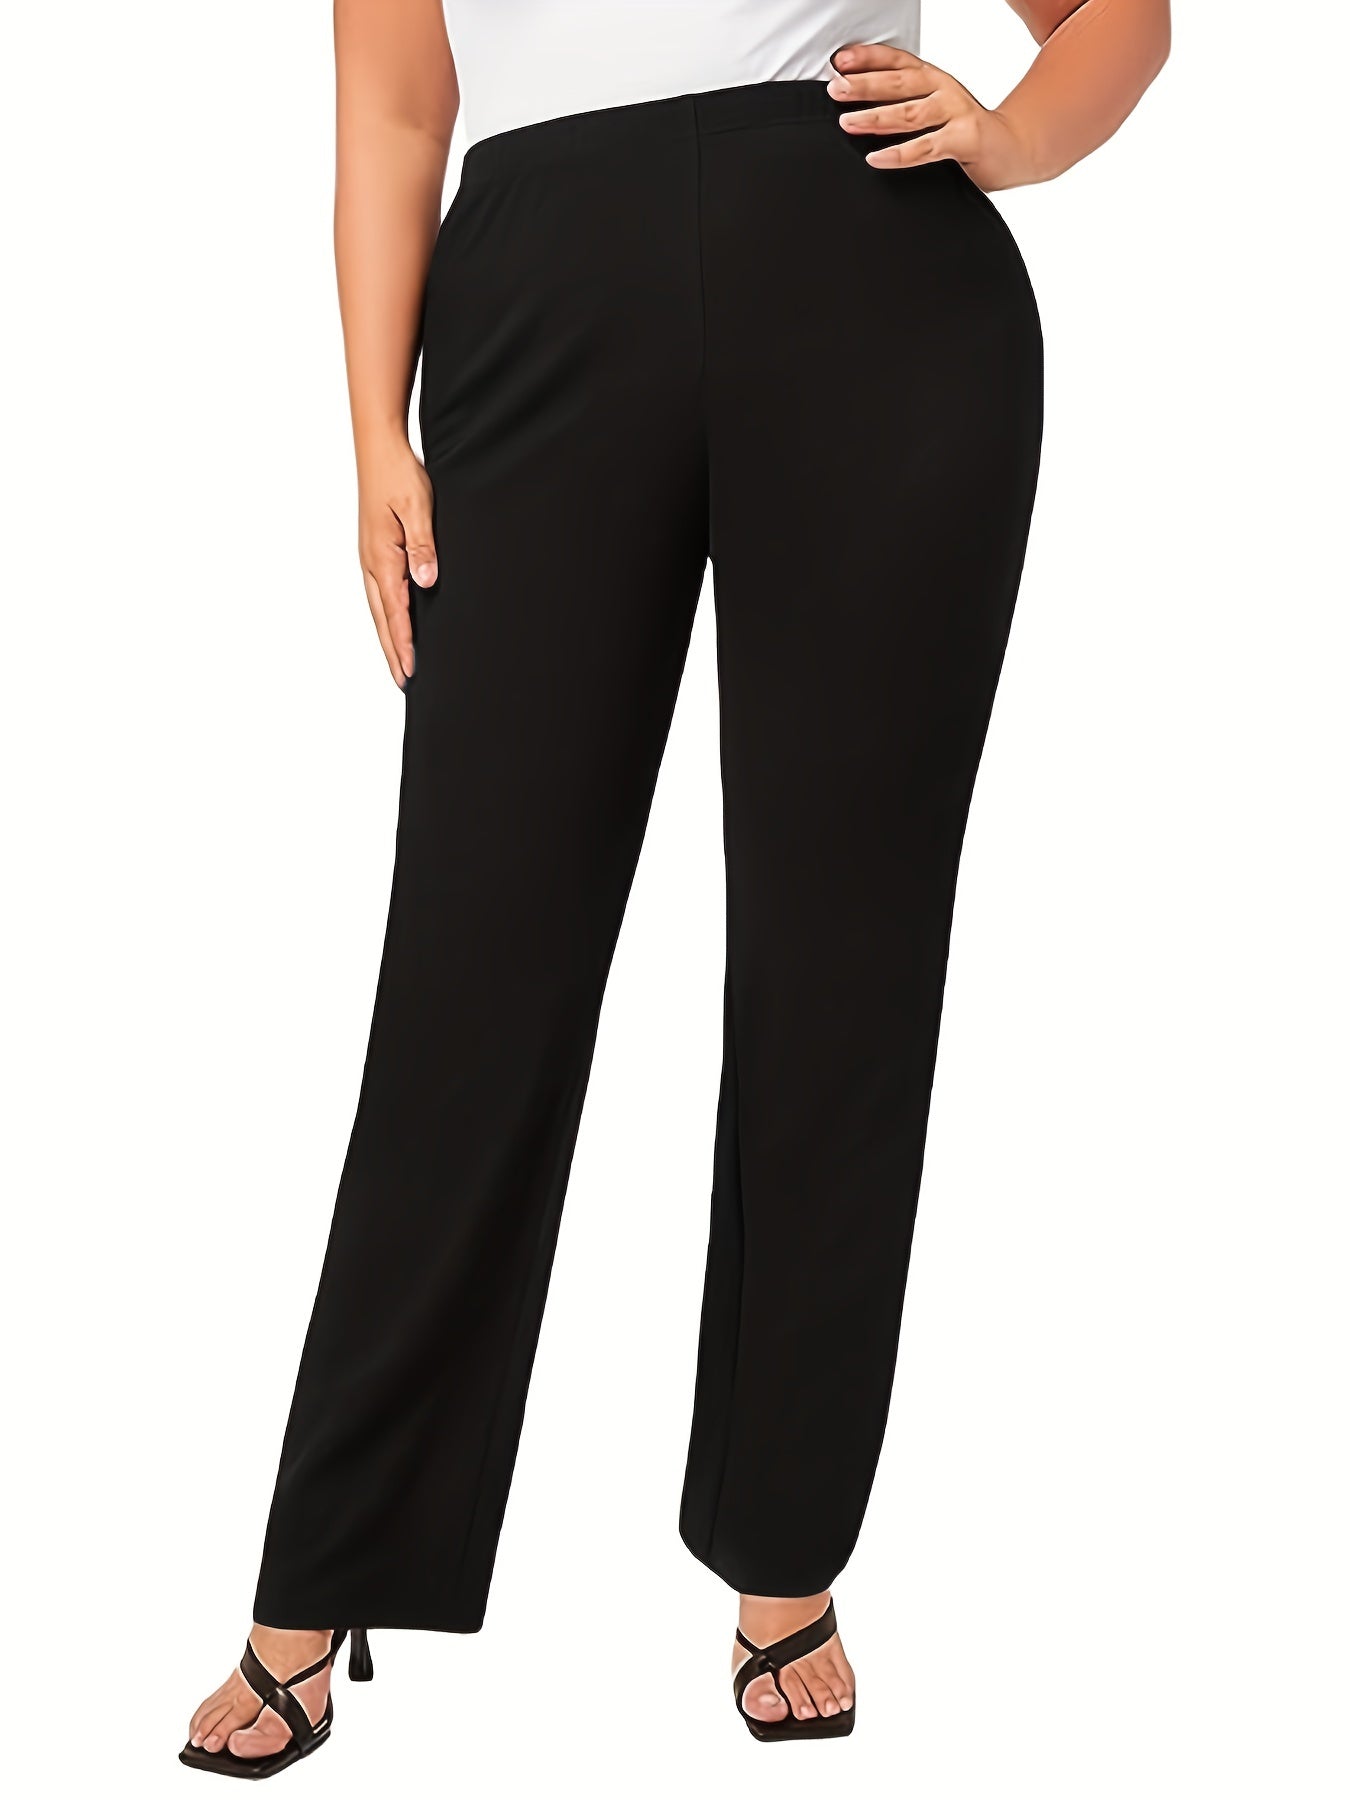 Plus Size Basic Pants, Women's Plus Solid High Rise Medium Stretch Workwear Trousers